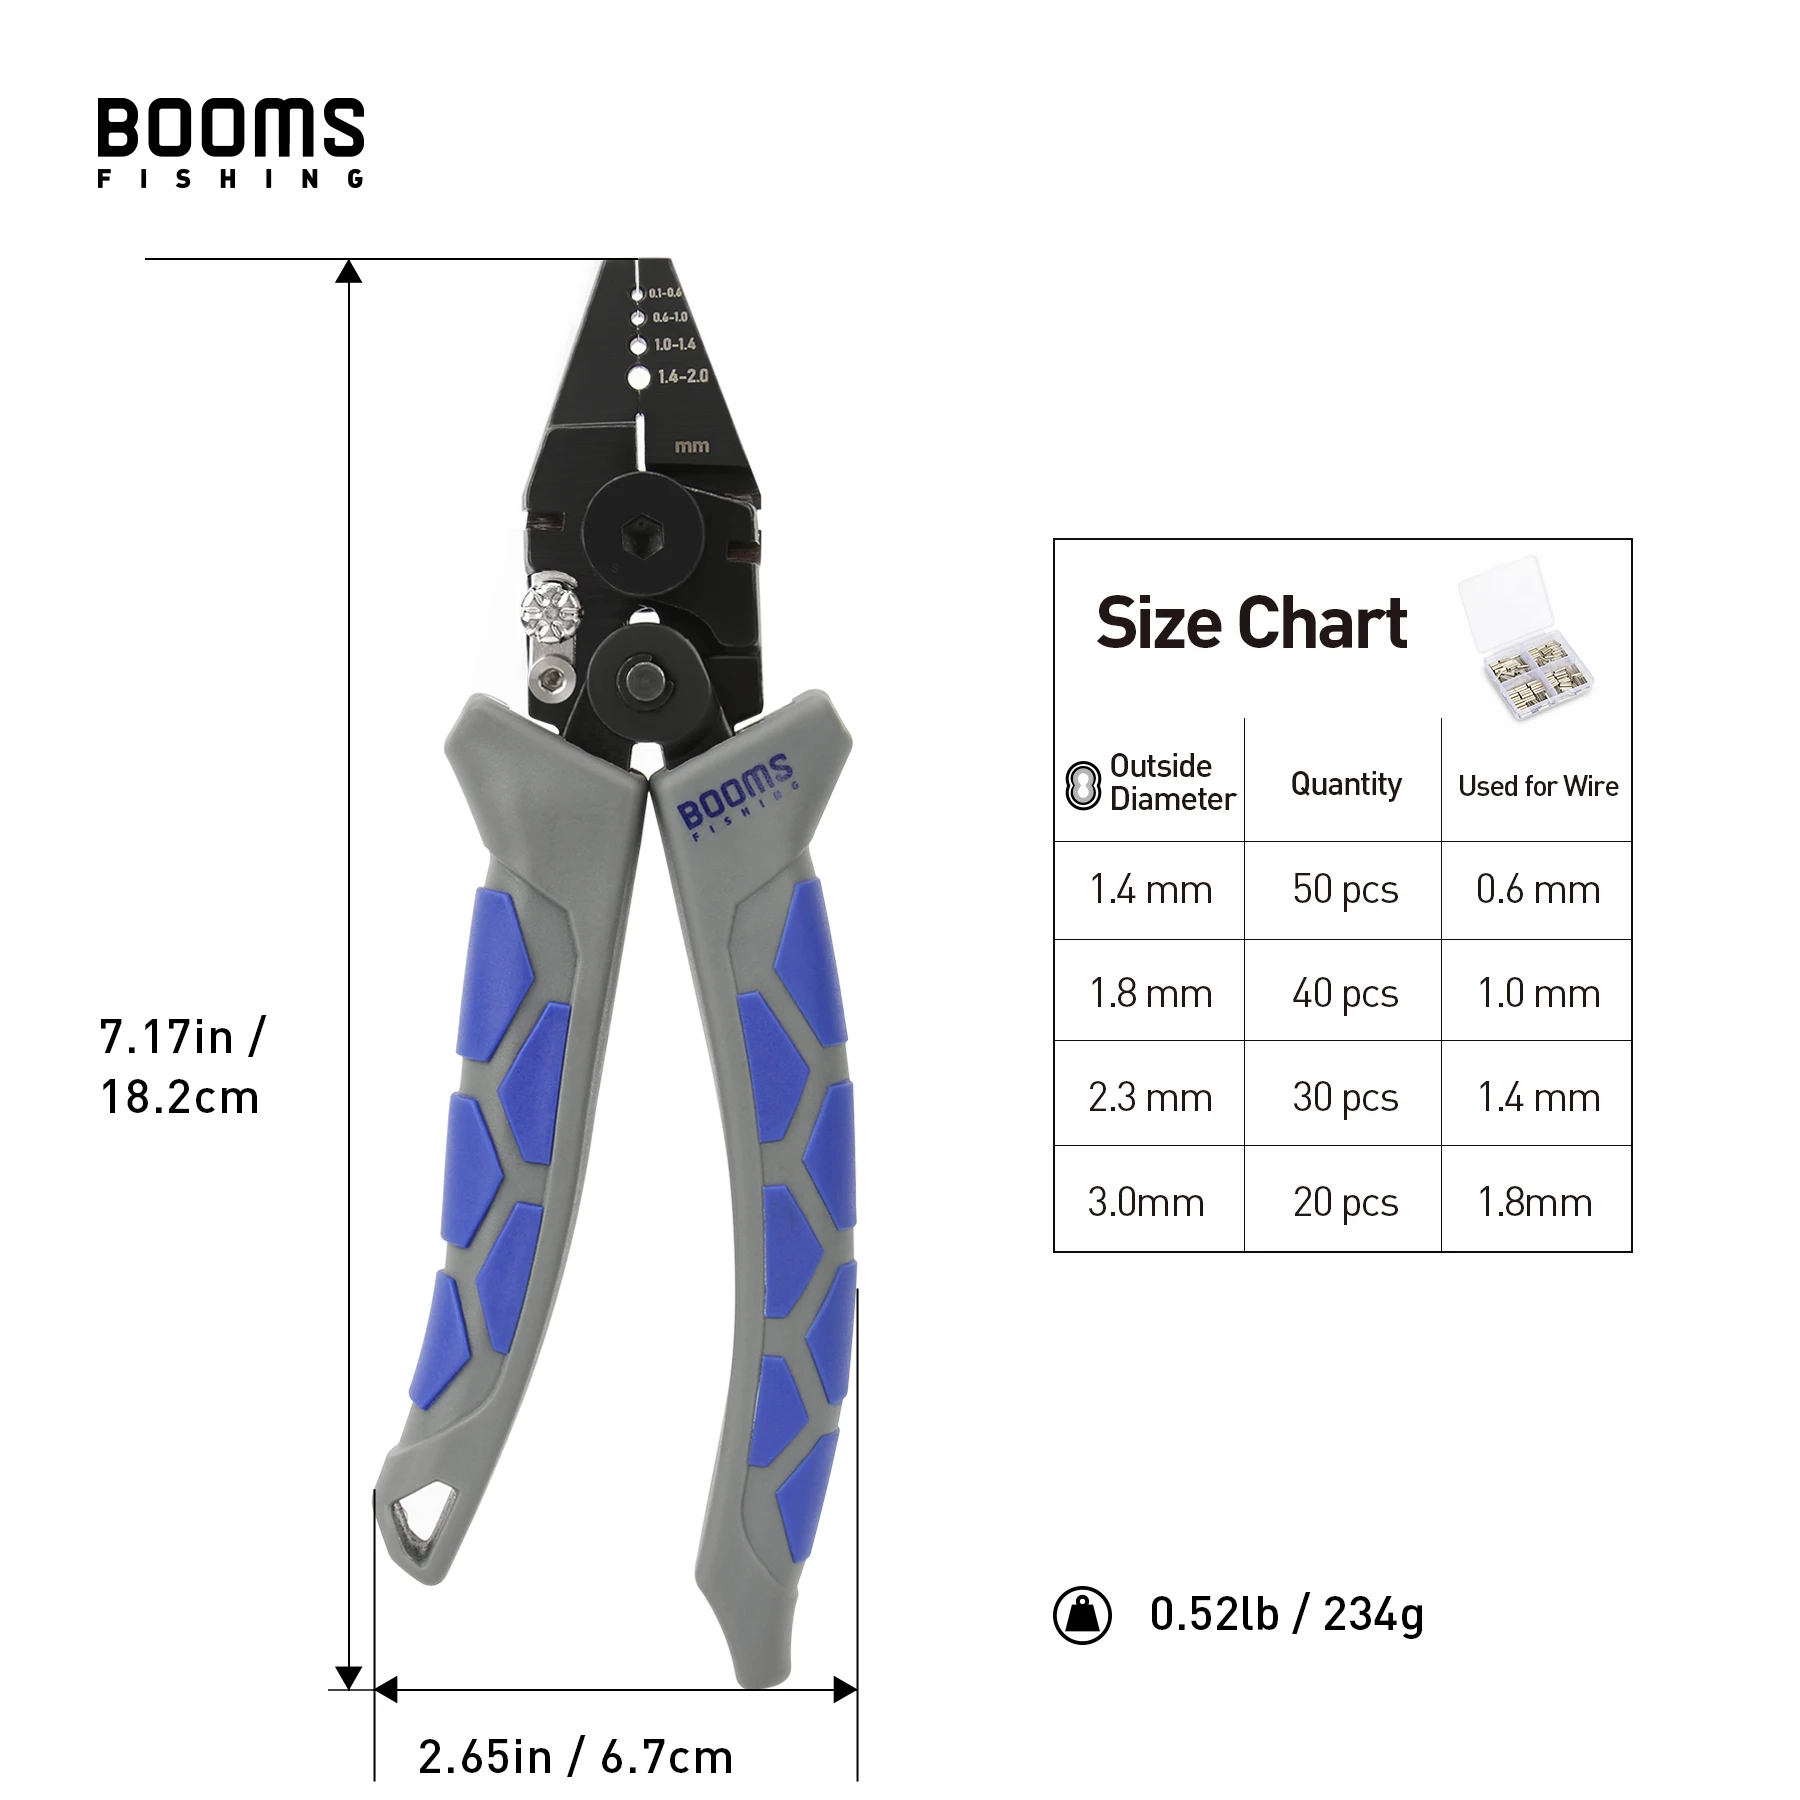 https://ae01.alicdn.com/kf/Sf2f952f692bf4abcb8e9dad5136d2e4co/Booms-Fishing-Crimping-Pliers-and-1-4mm-3-0mm-140pcs-Aluminium-Sleeves-Tool-Set-Steel-Wire.jpg